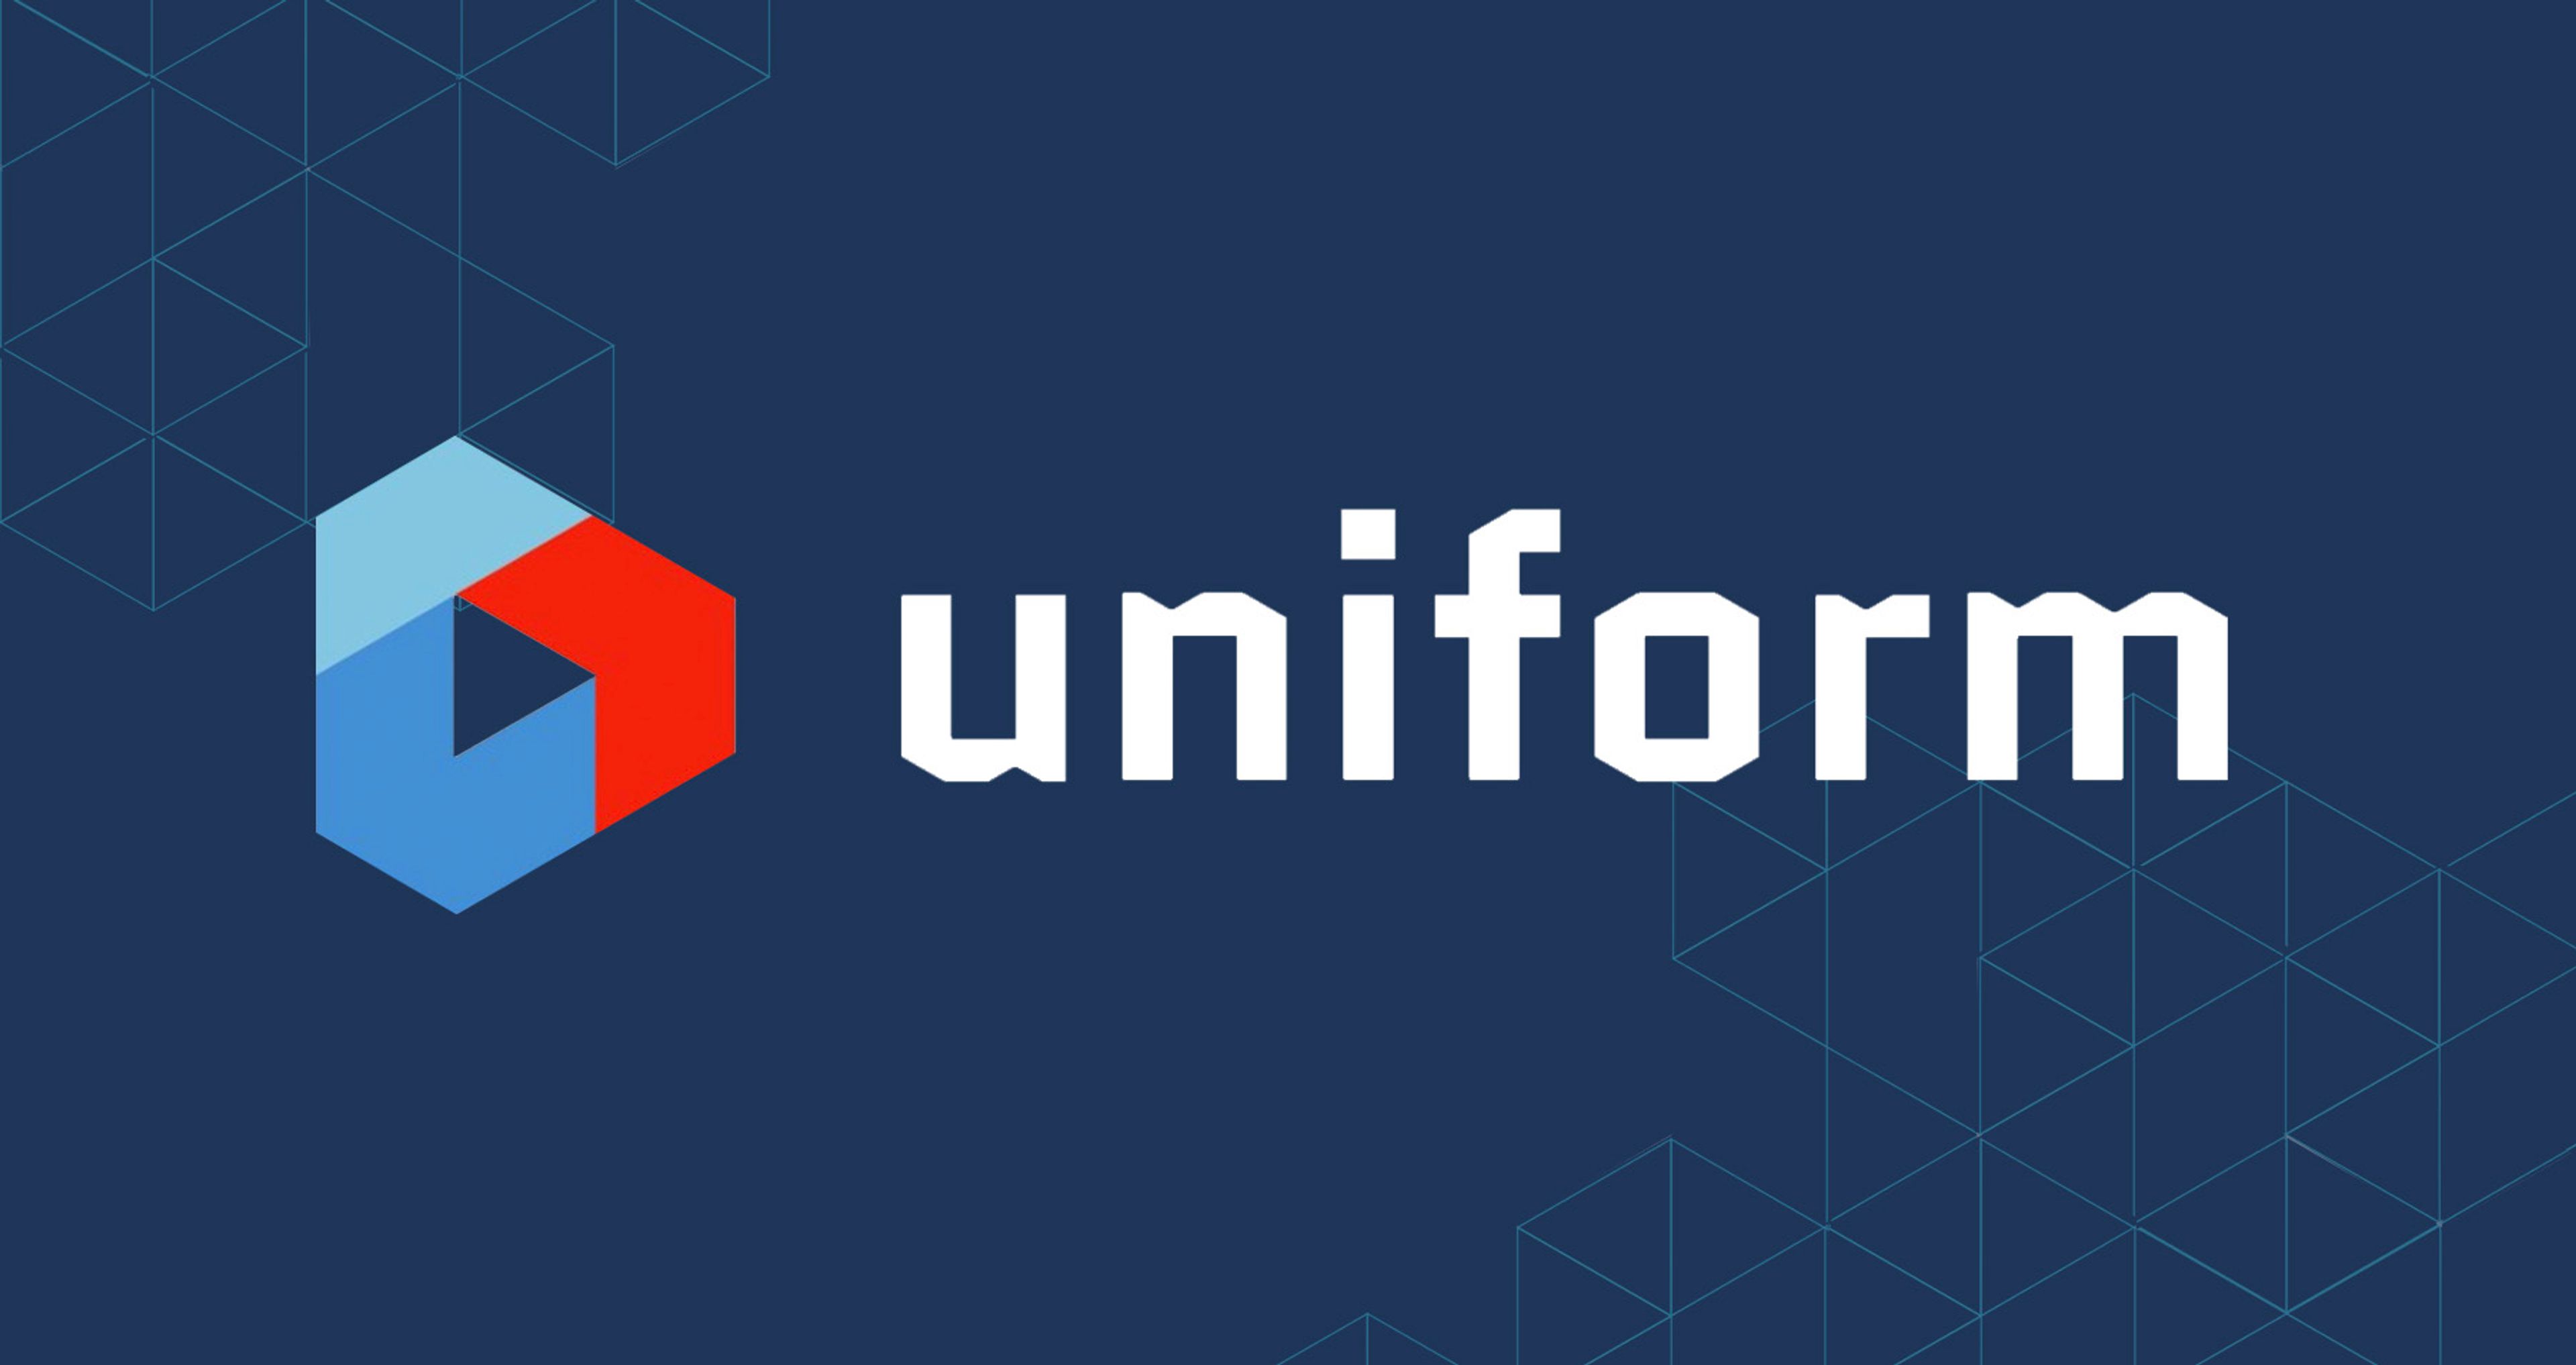 Image of Uniform logo against a dark blue background with cube graphics.